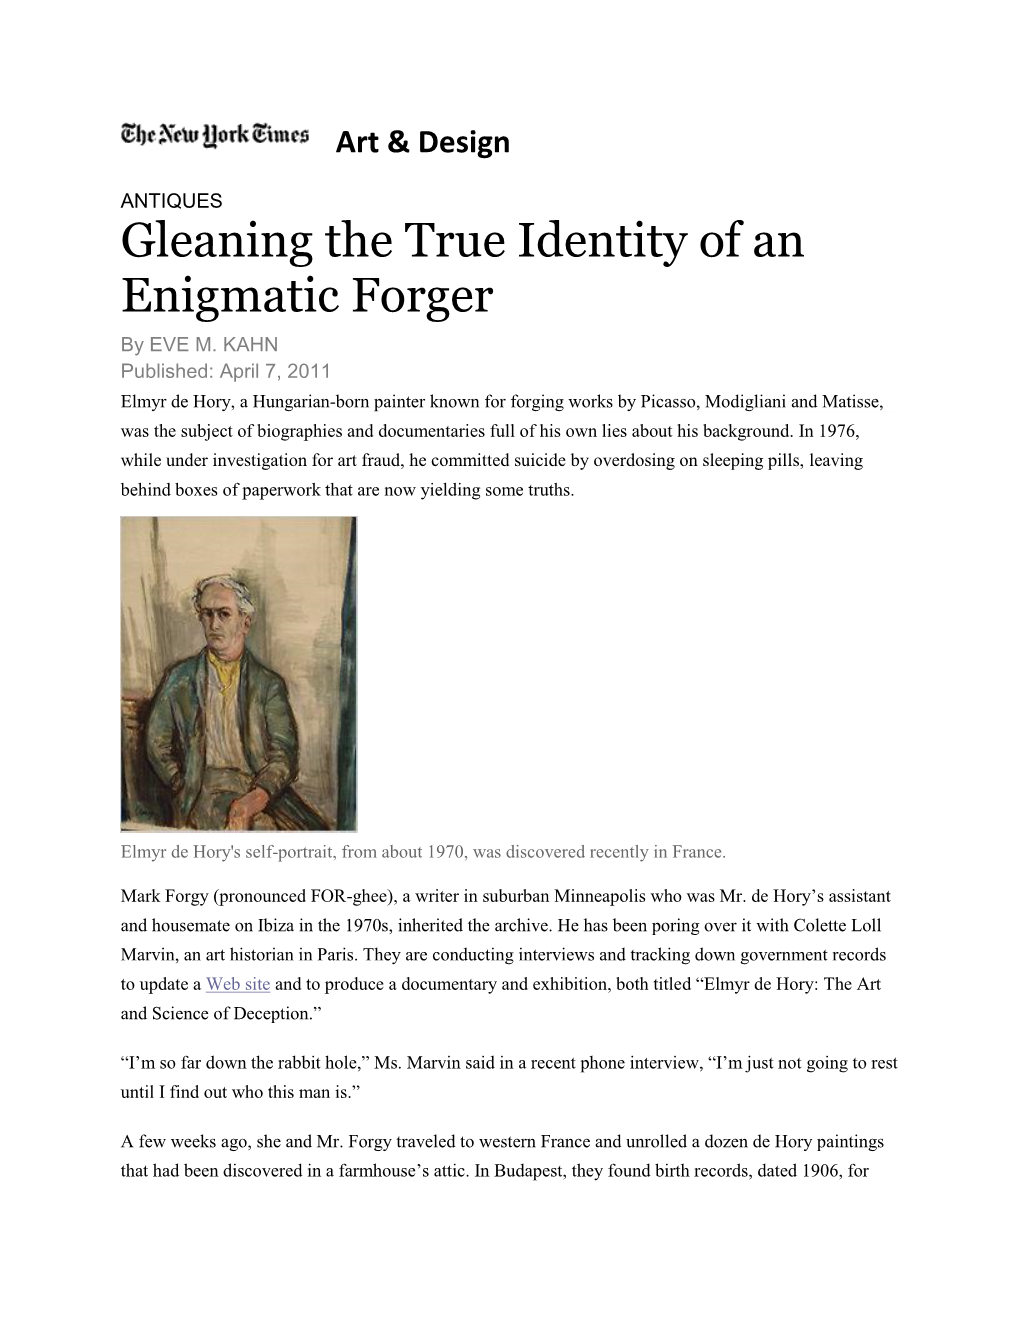 Gleaning the True Identity of an Enigmatic Forger by EVE M